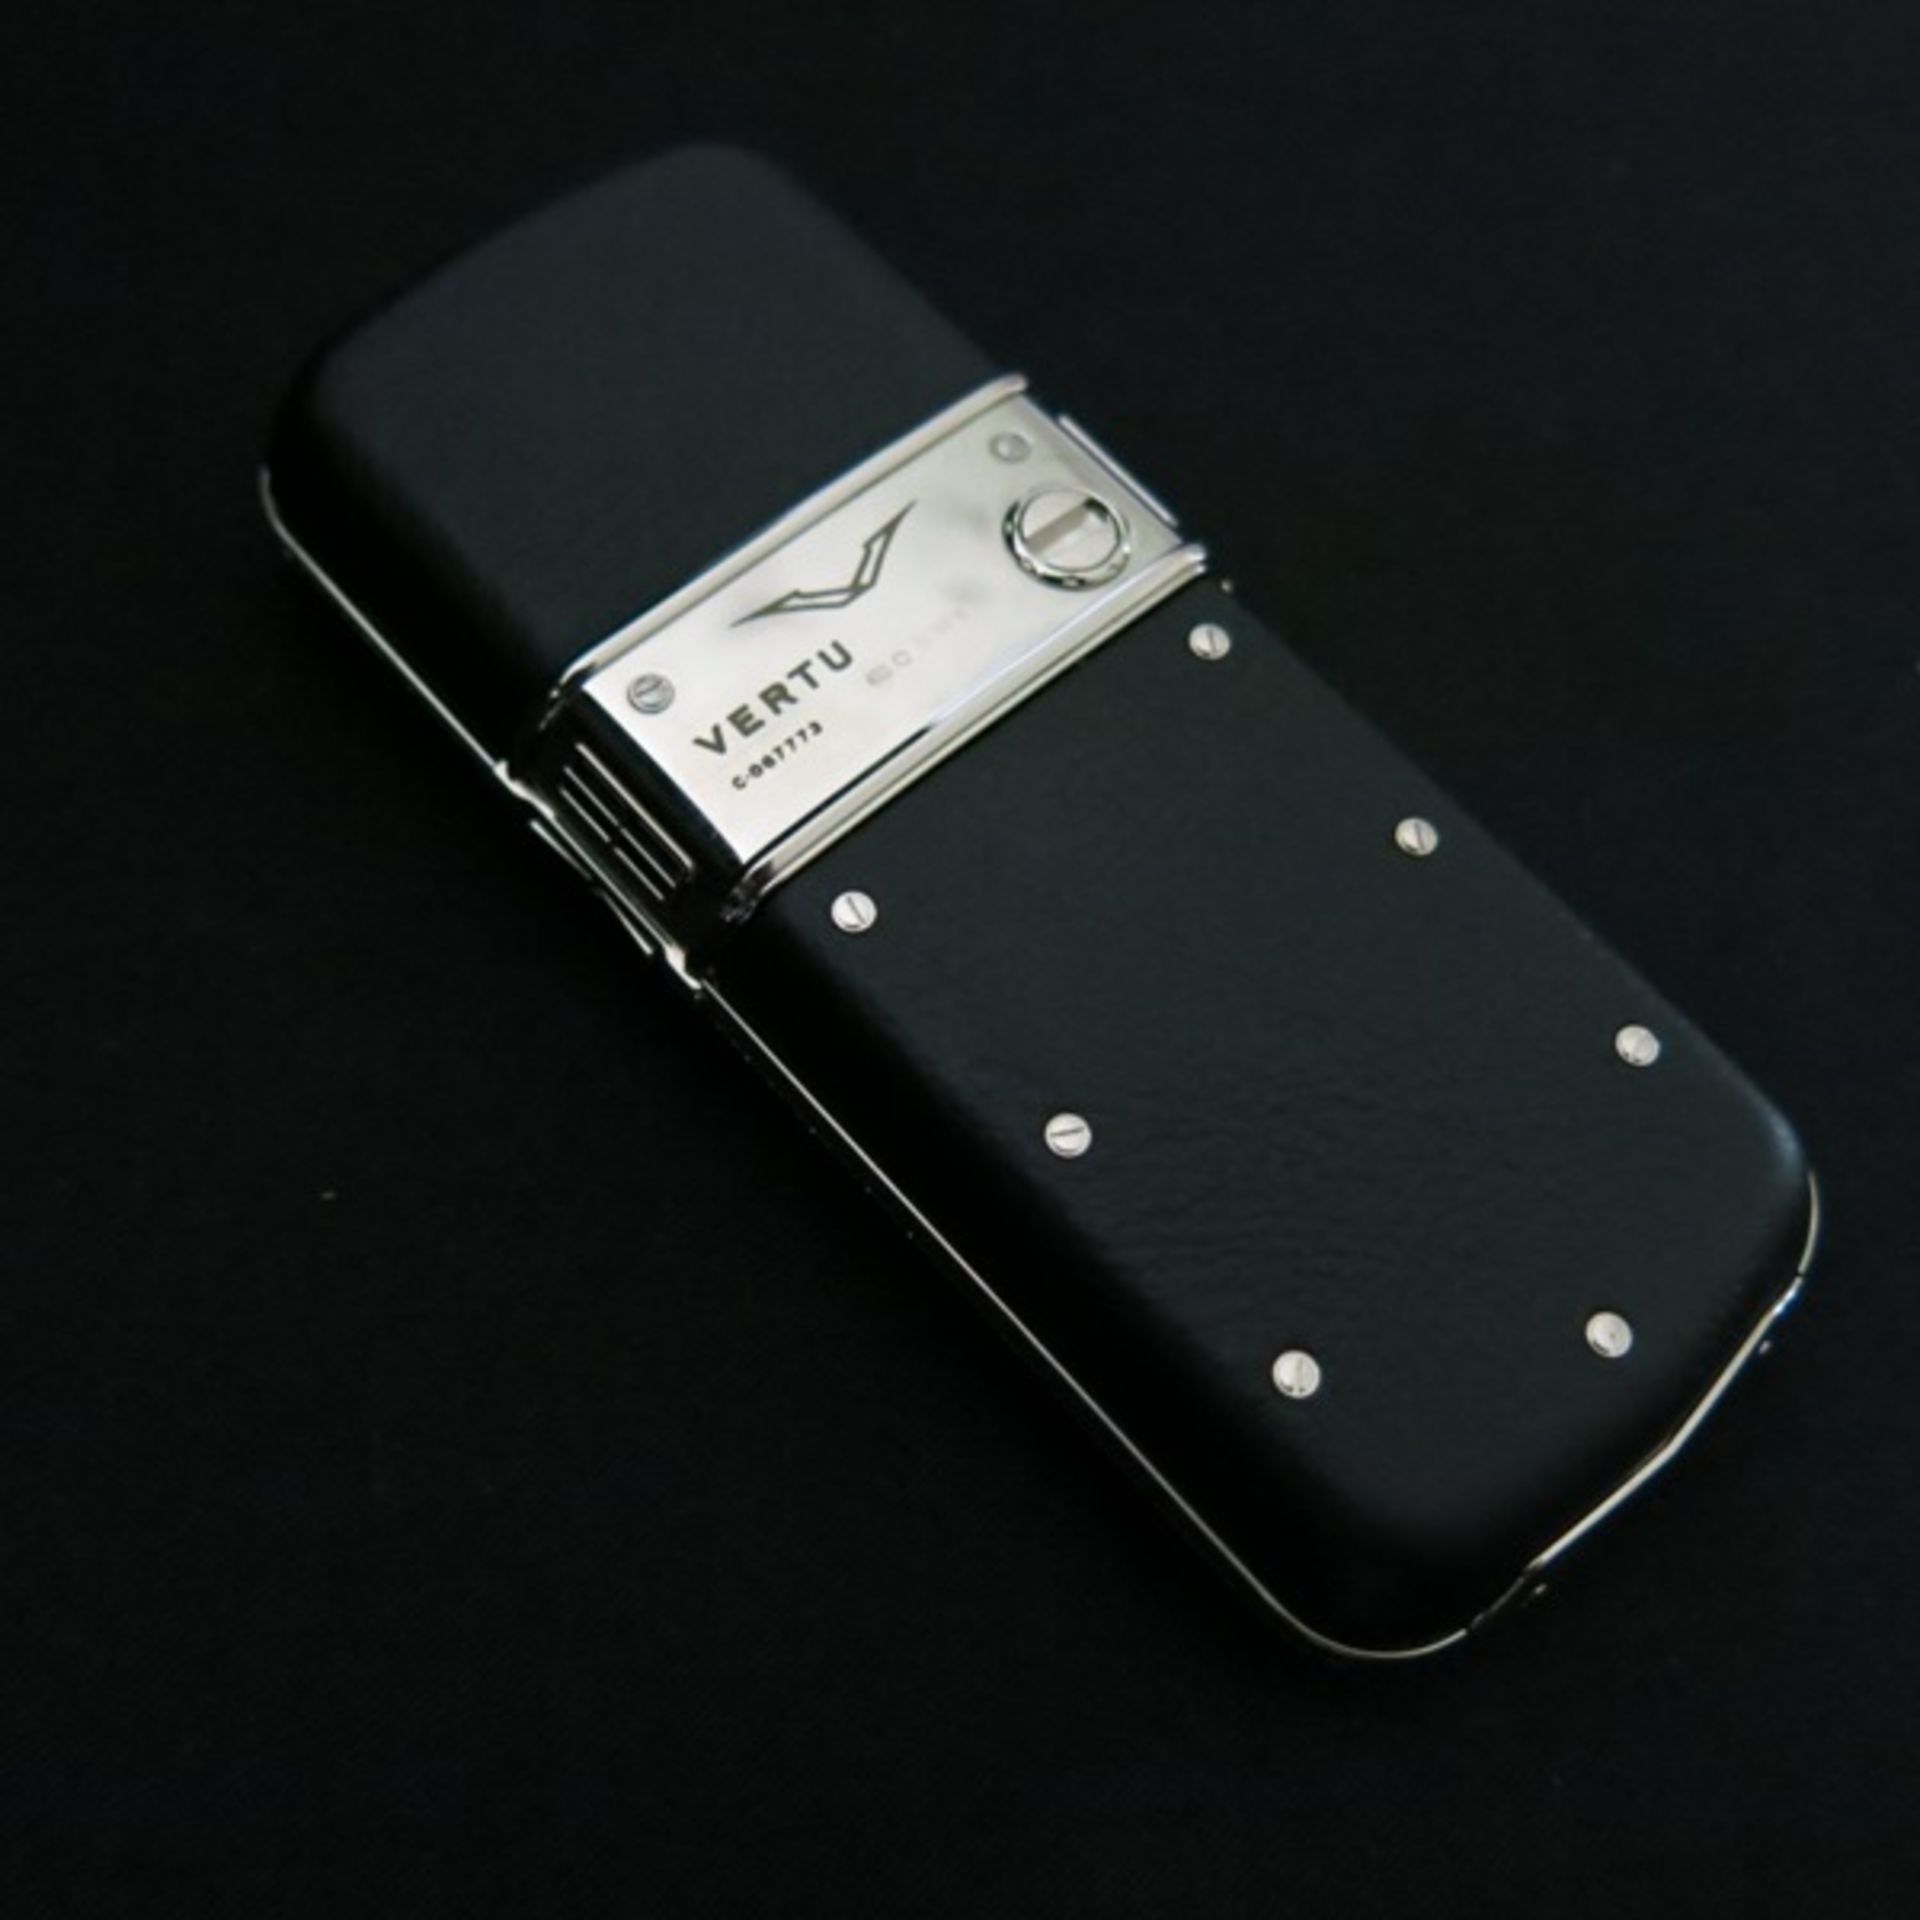 Vertu Constellation Classic Phone with 18kt White Gold & Diamond Trim Bezel, Back Plate, Select - Image 3 of 7